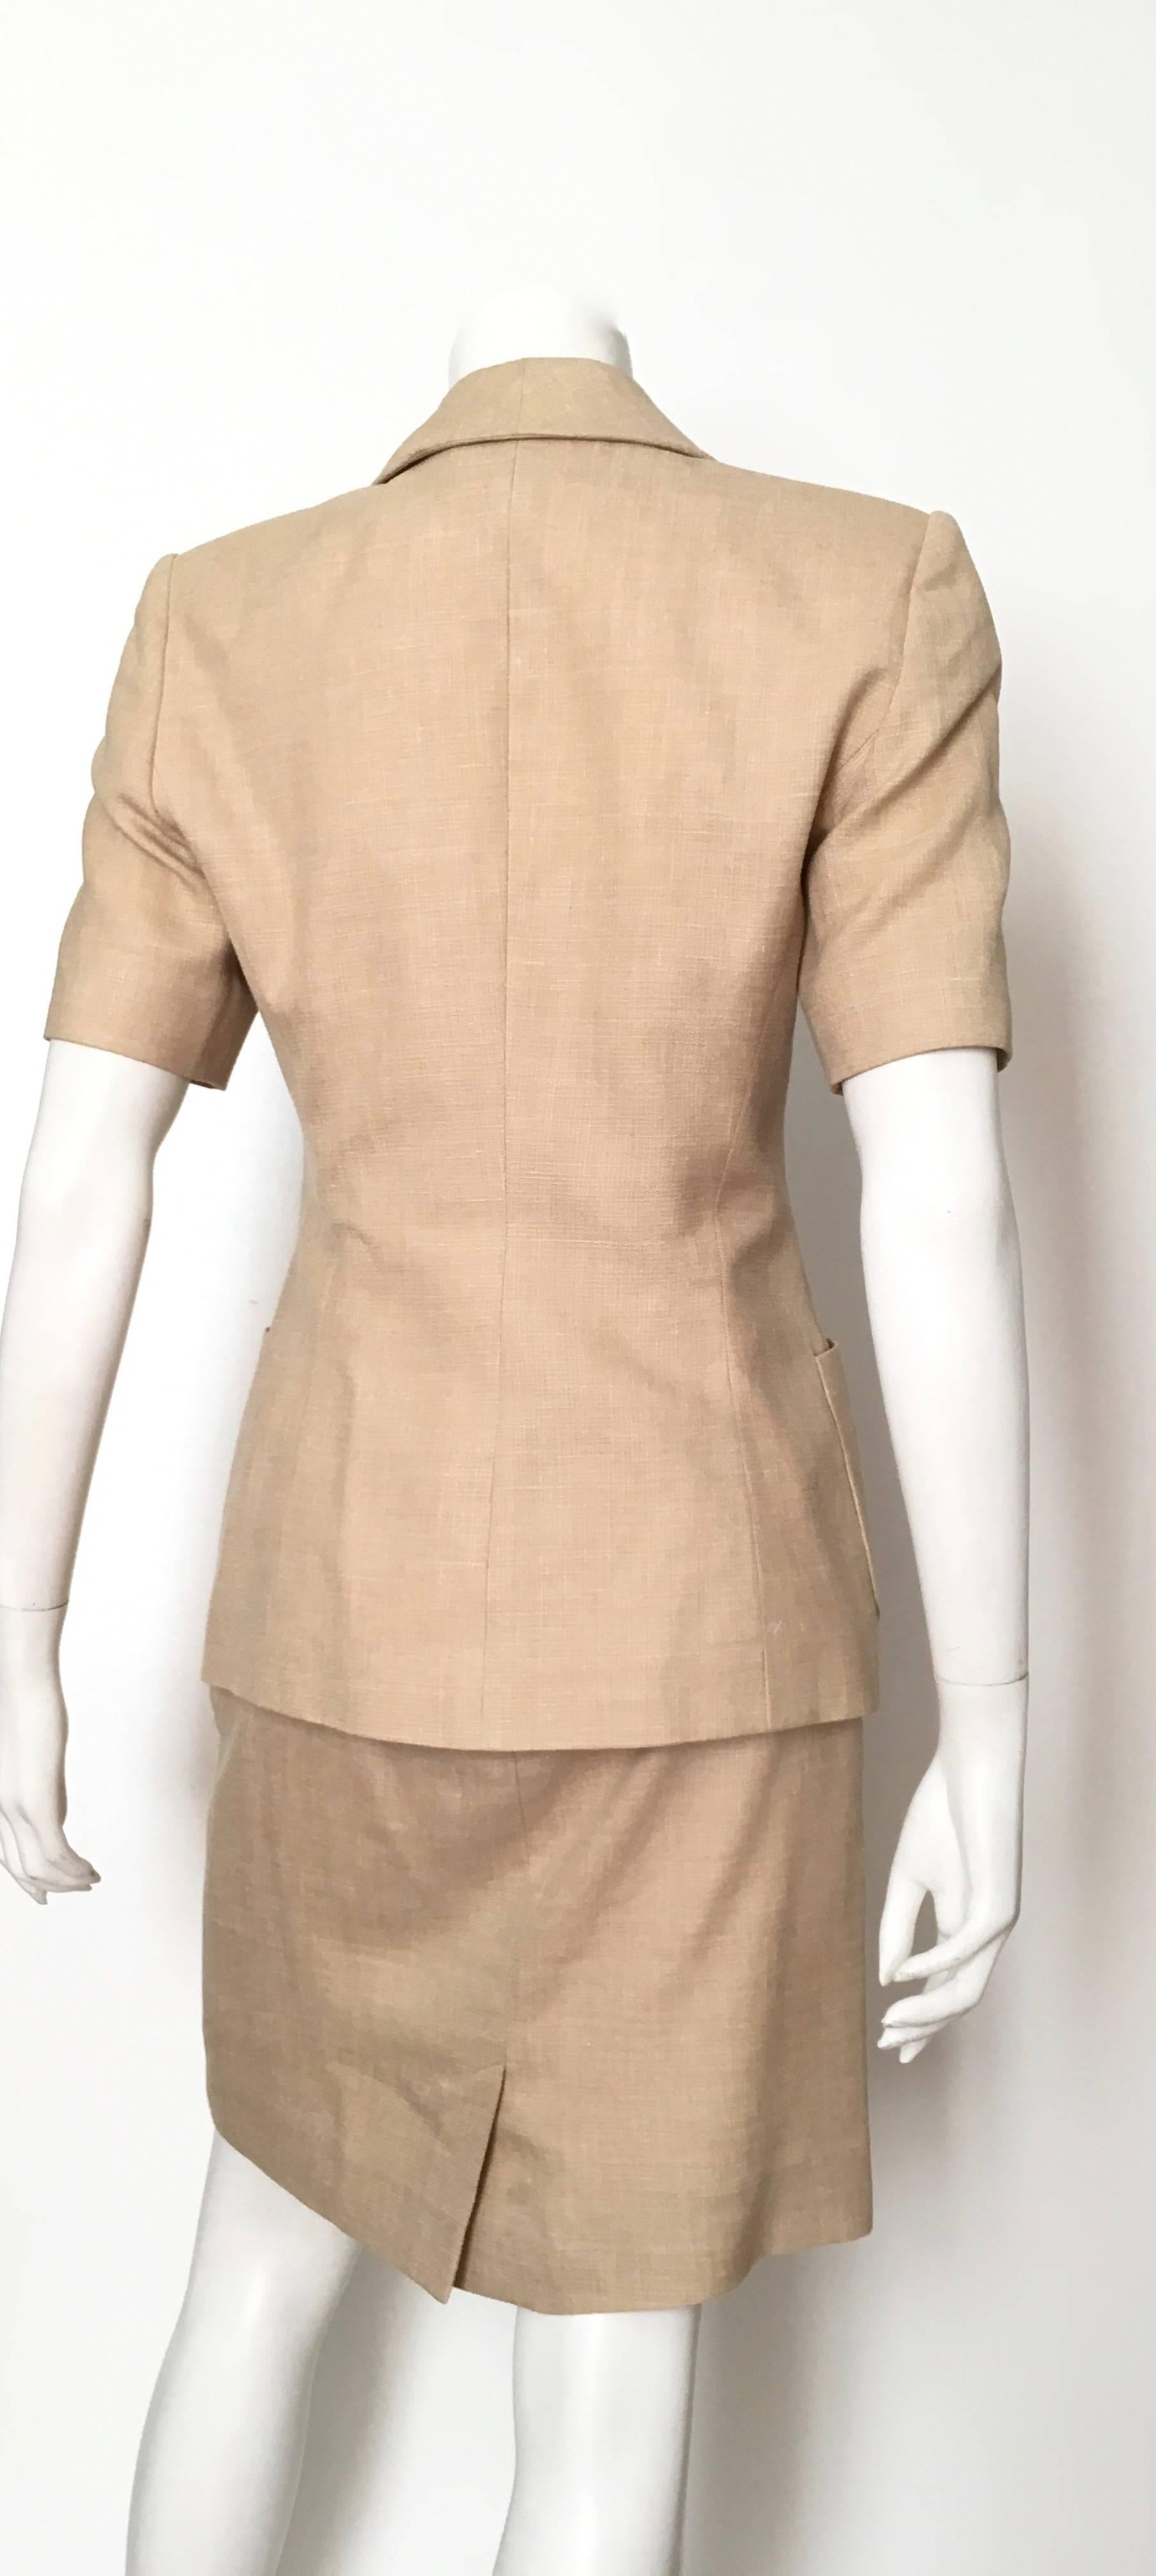 Women's or Men's Givenchy Couture 1990s Tan Jacket & Skirt Set Size 6.